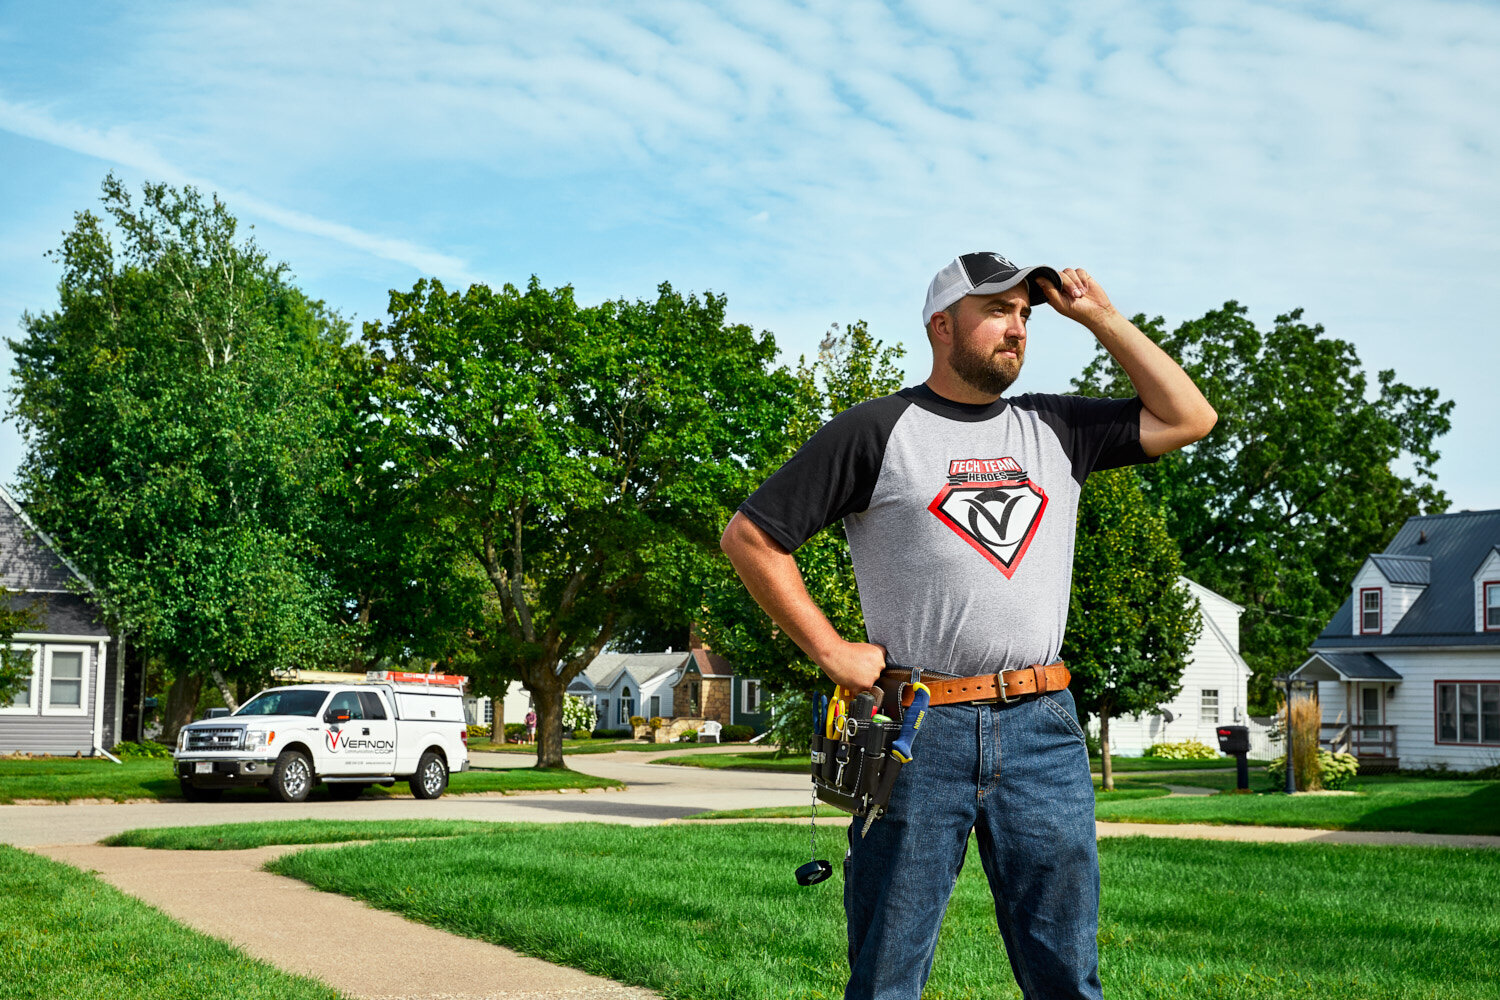 commercial portrait of network technician heroically posed in Viroqua, WI neighborhood